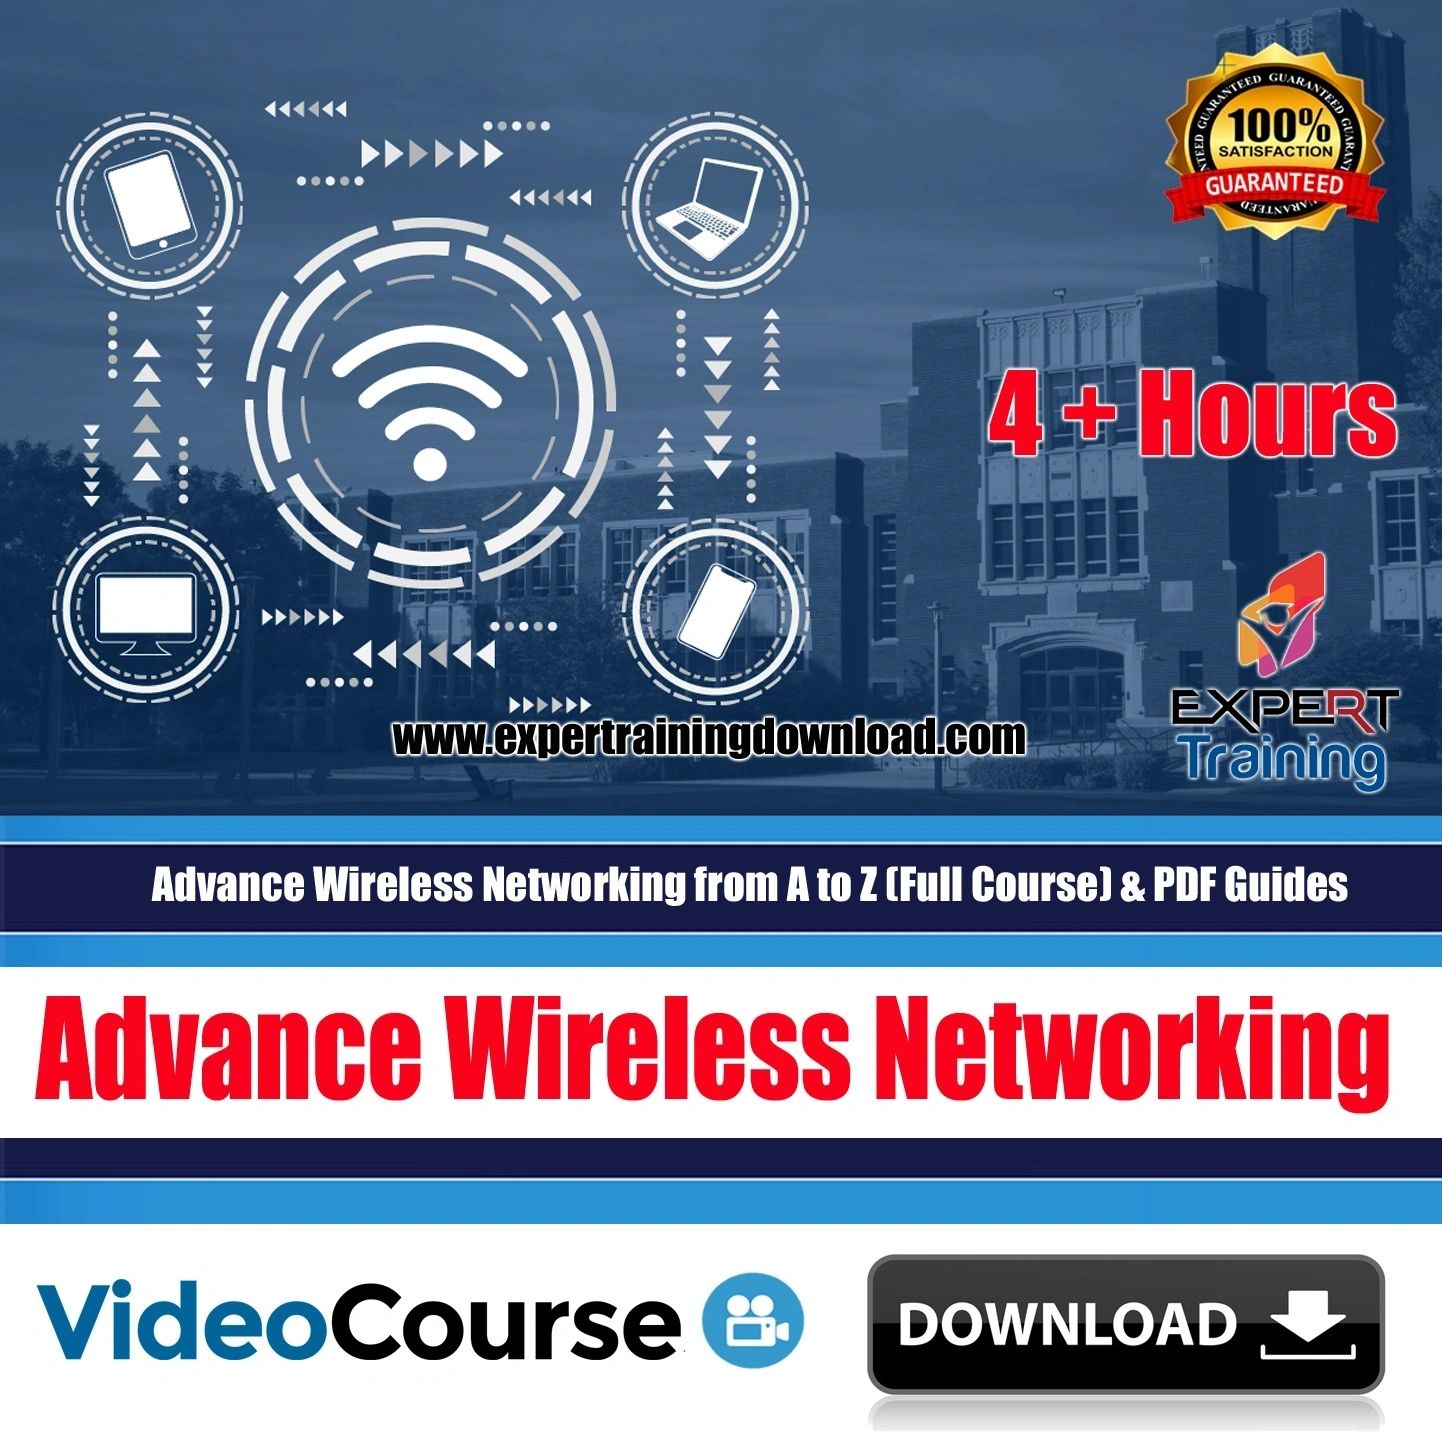 Advance Wireless Networking from A to Z (Full Course) & PDF Guides